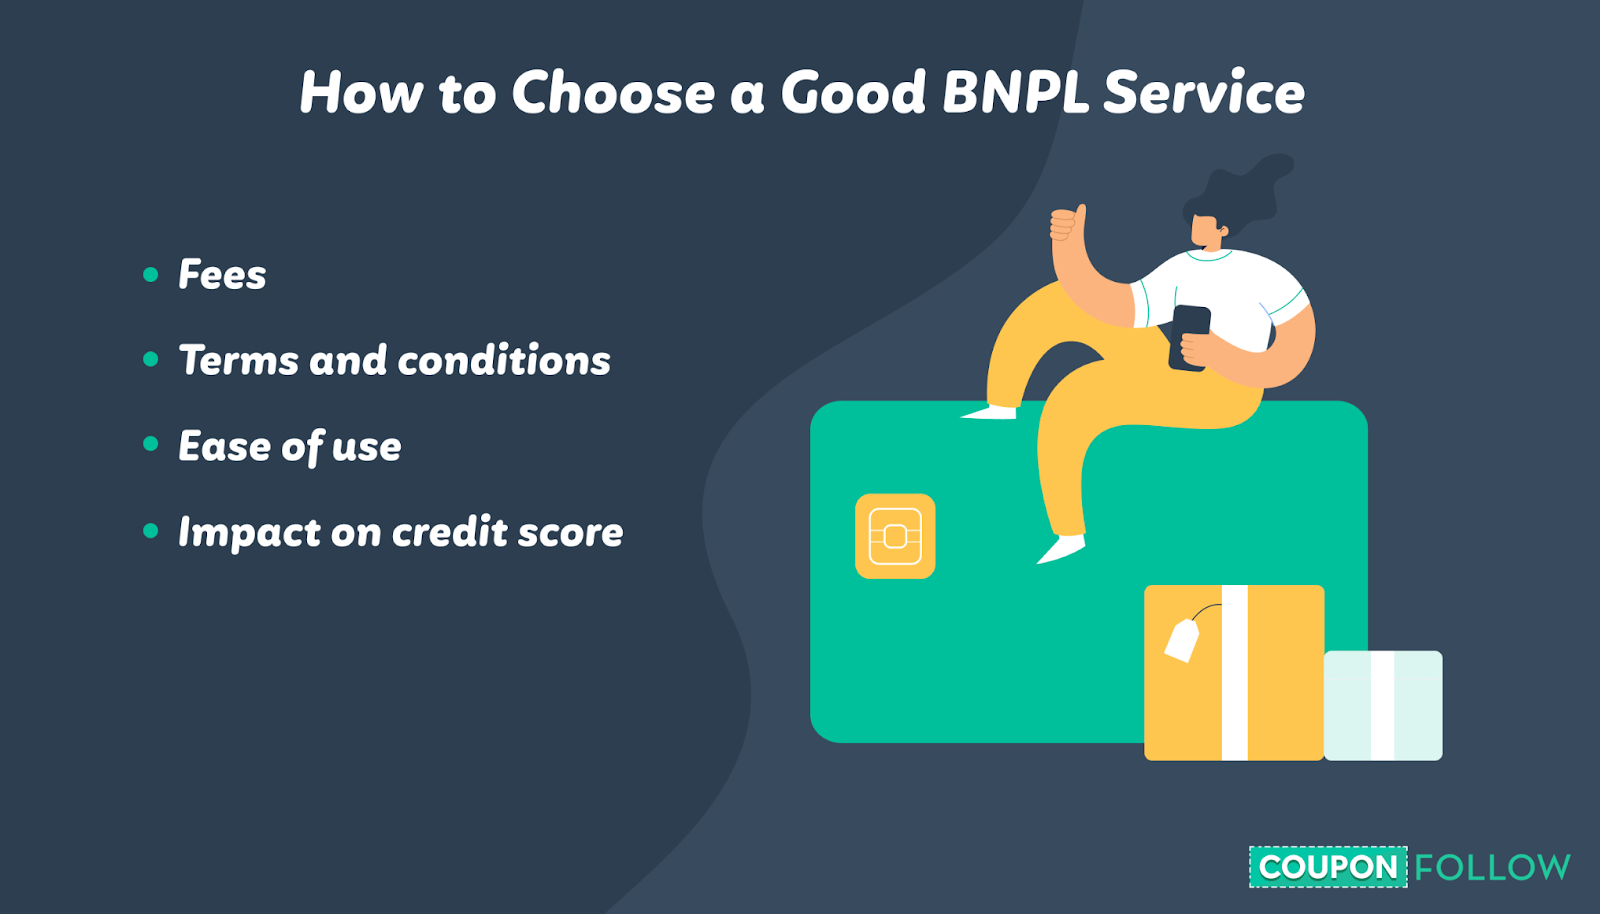 Factors to consider in a BNPL service